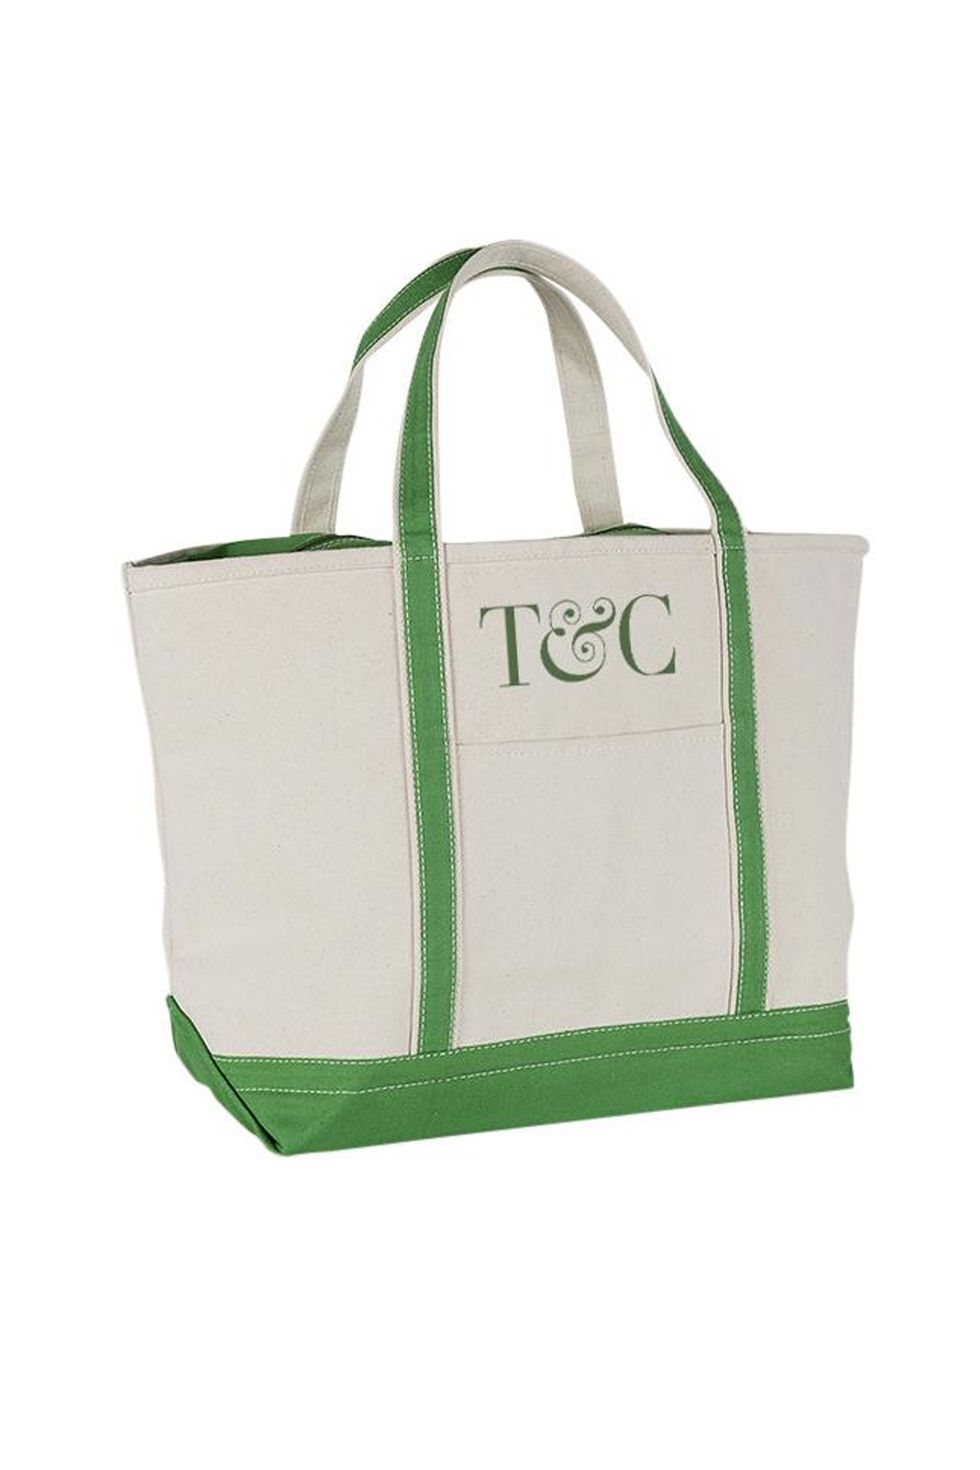 Limited Edition T&C Tote Bag, Green